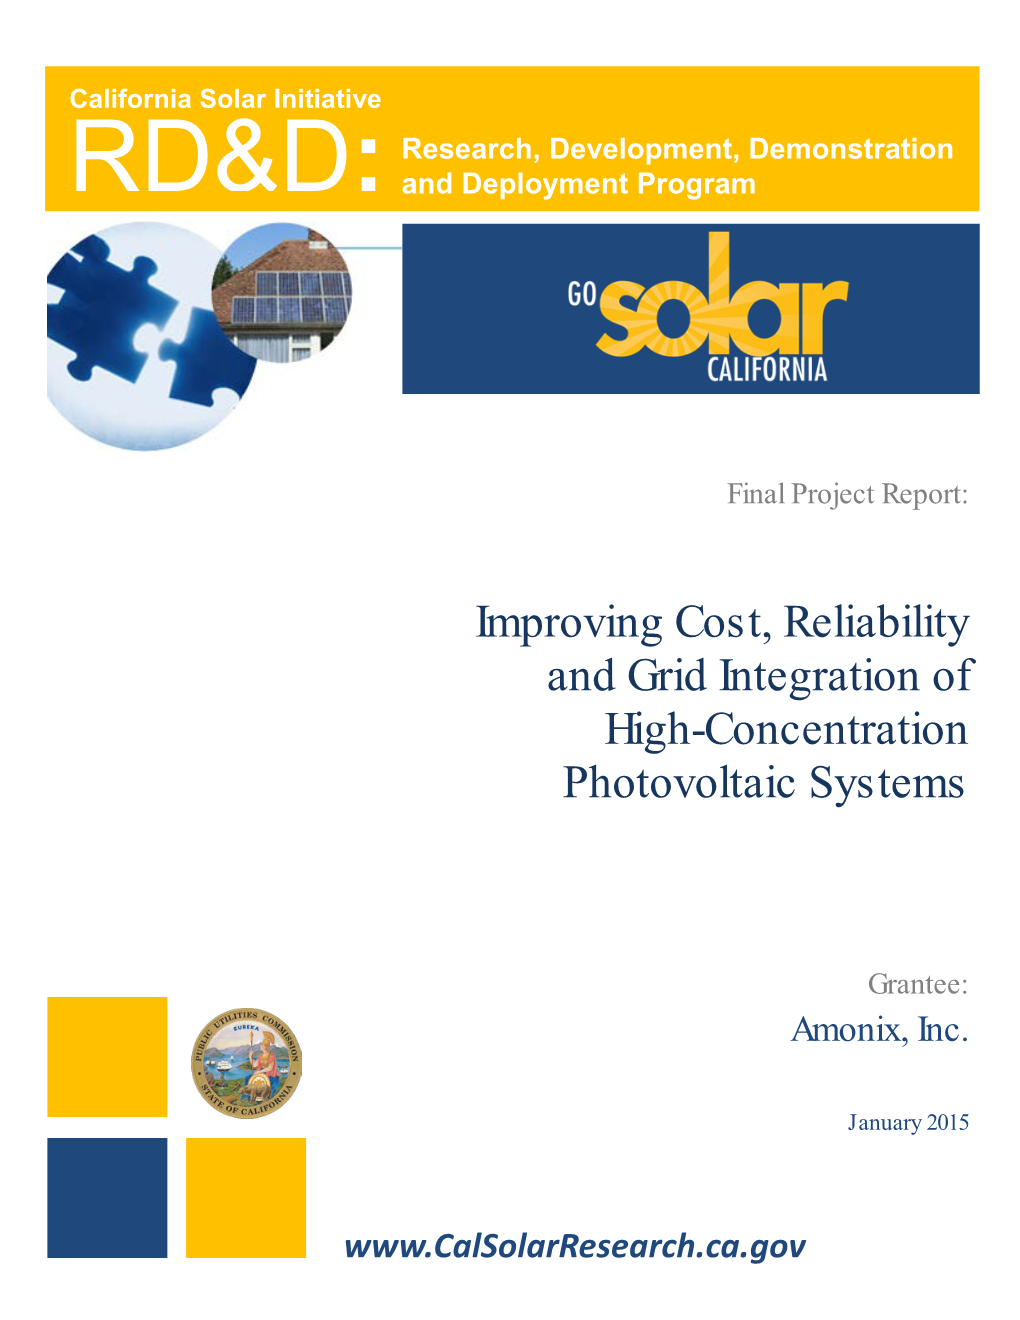 Improved Cost, Reliability, and Grid Integration of High Concentration Photovoltaic Systems